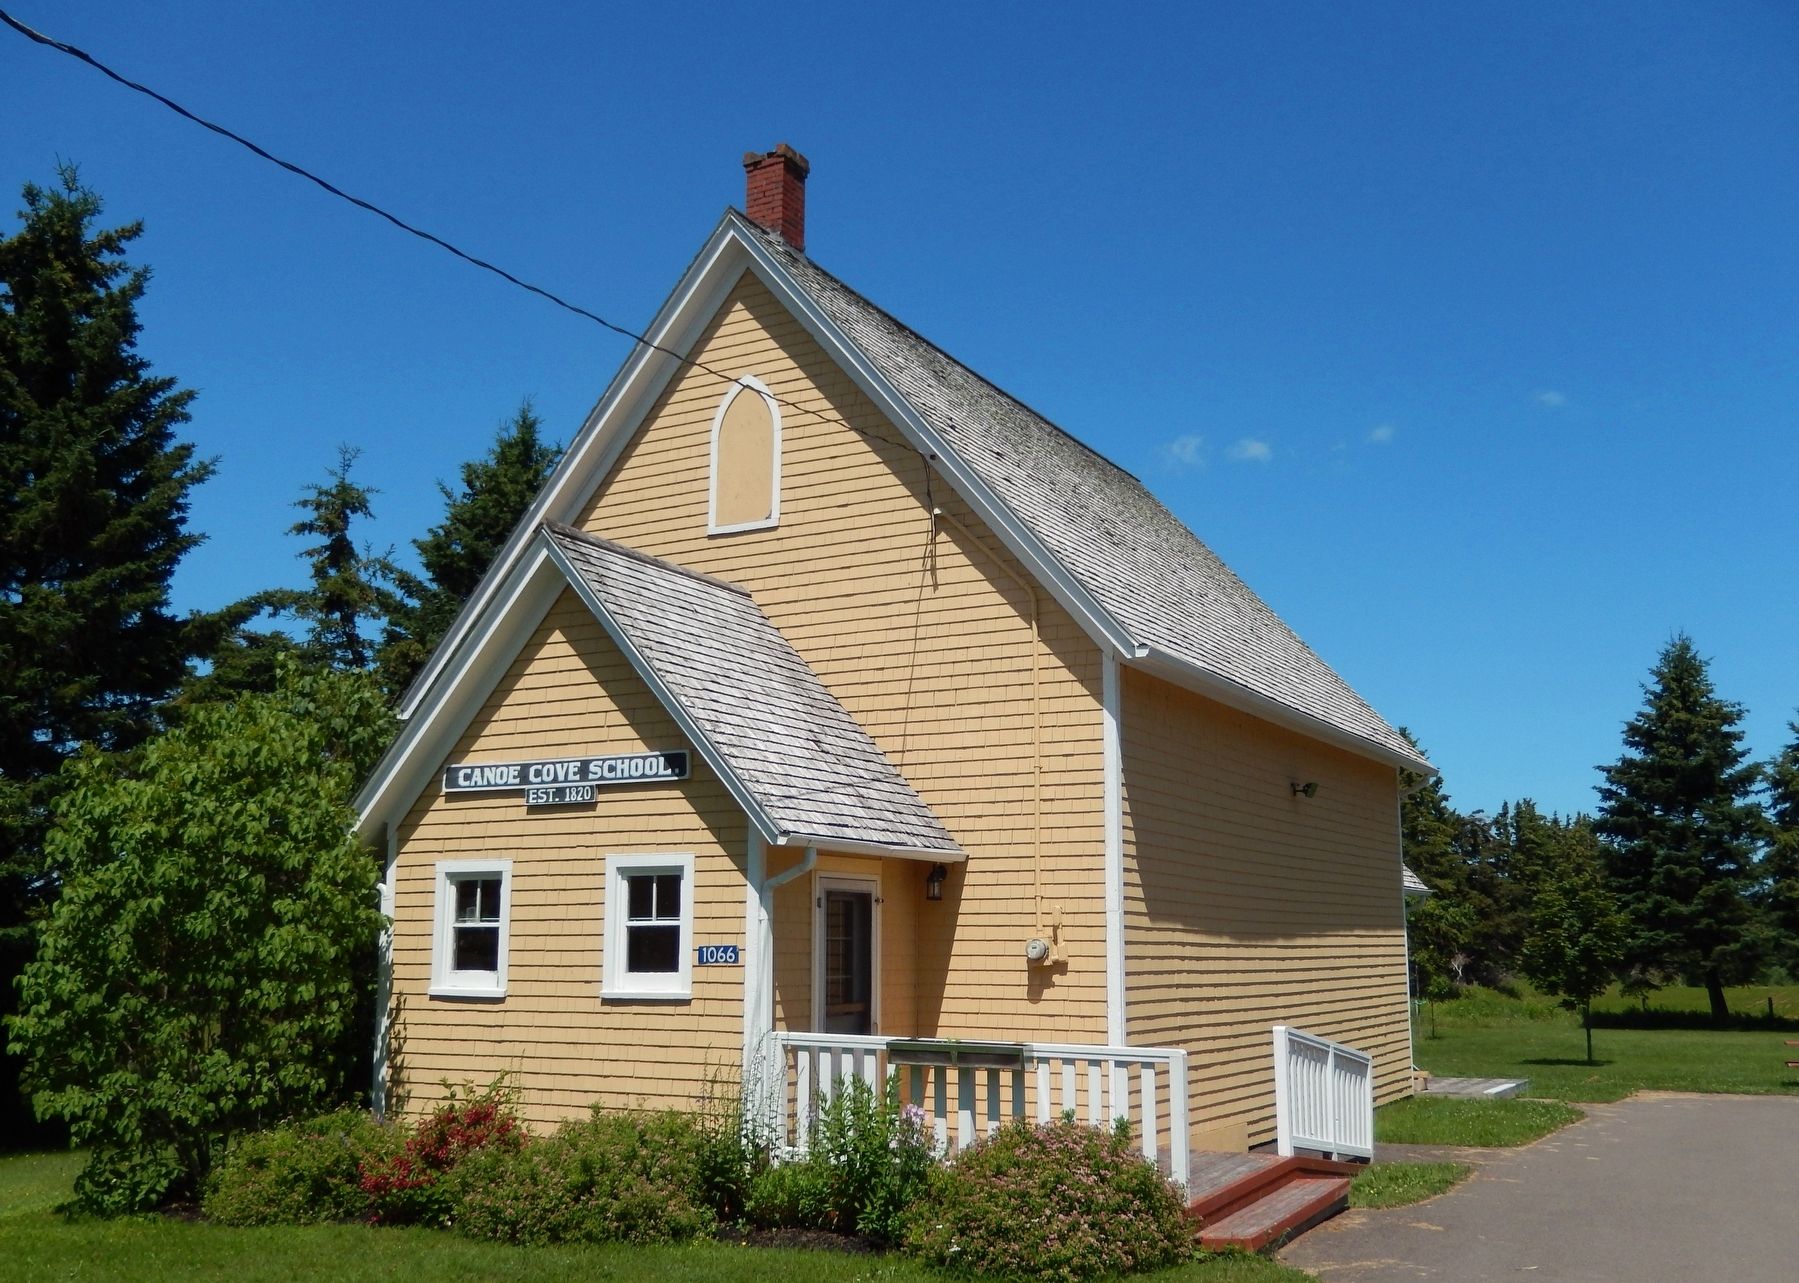 Canoe Cove School (<i>front view from Canoe Cove Road</i>) image. Click for full size.